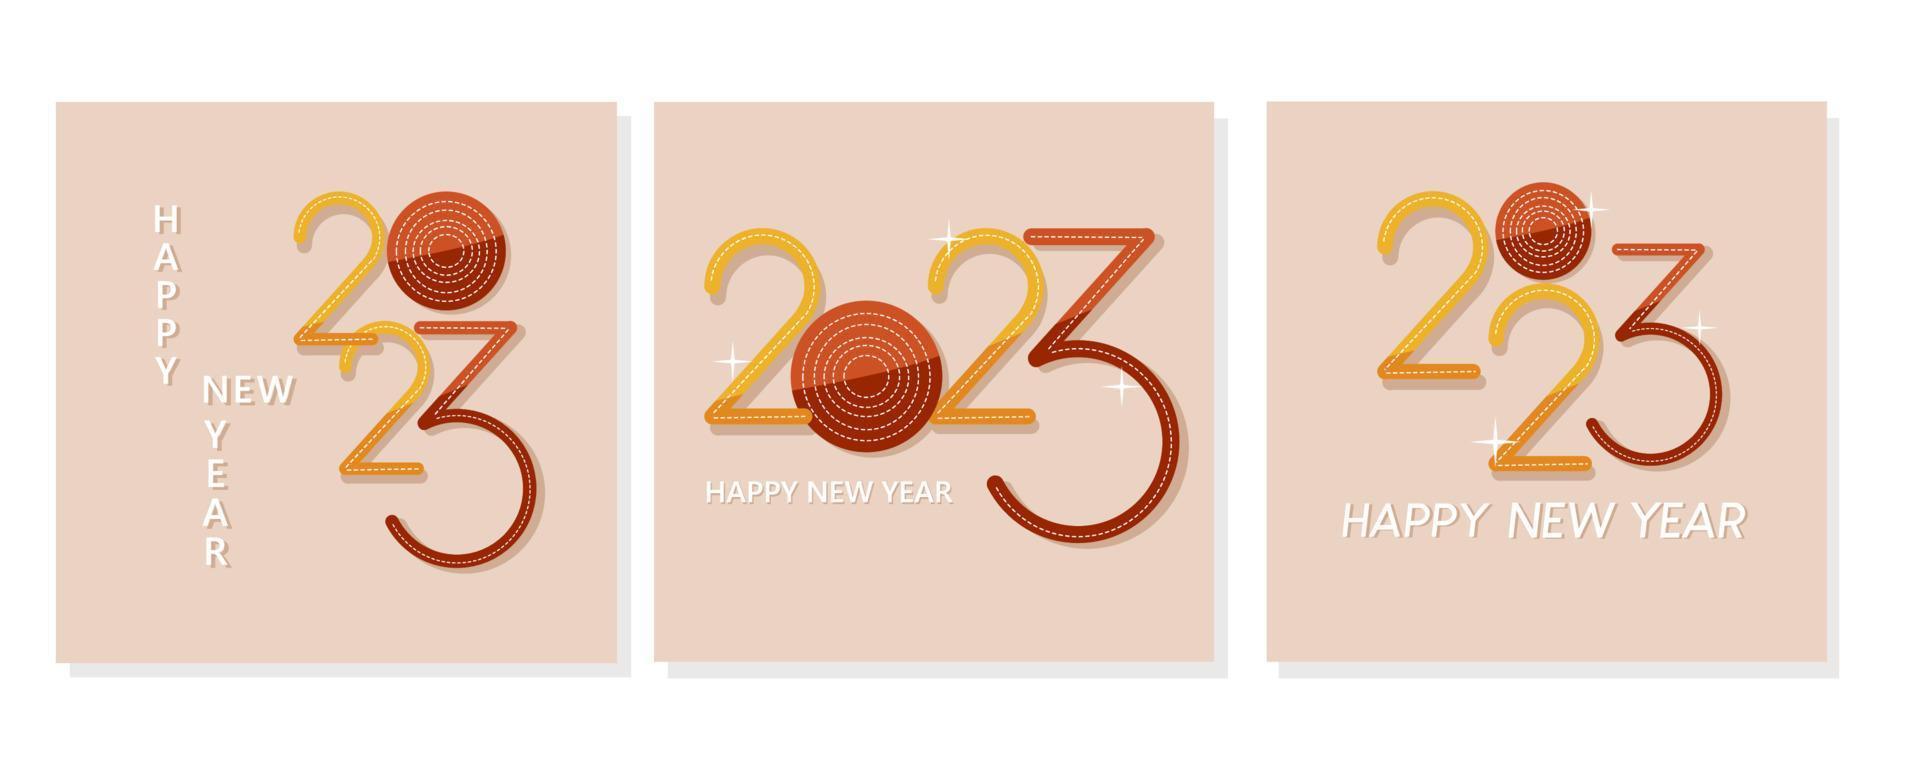 Happy New year 2023. Set of square banner template. Calendar cover vector concept in red and yellow colors.